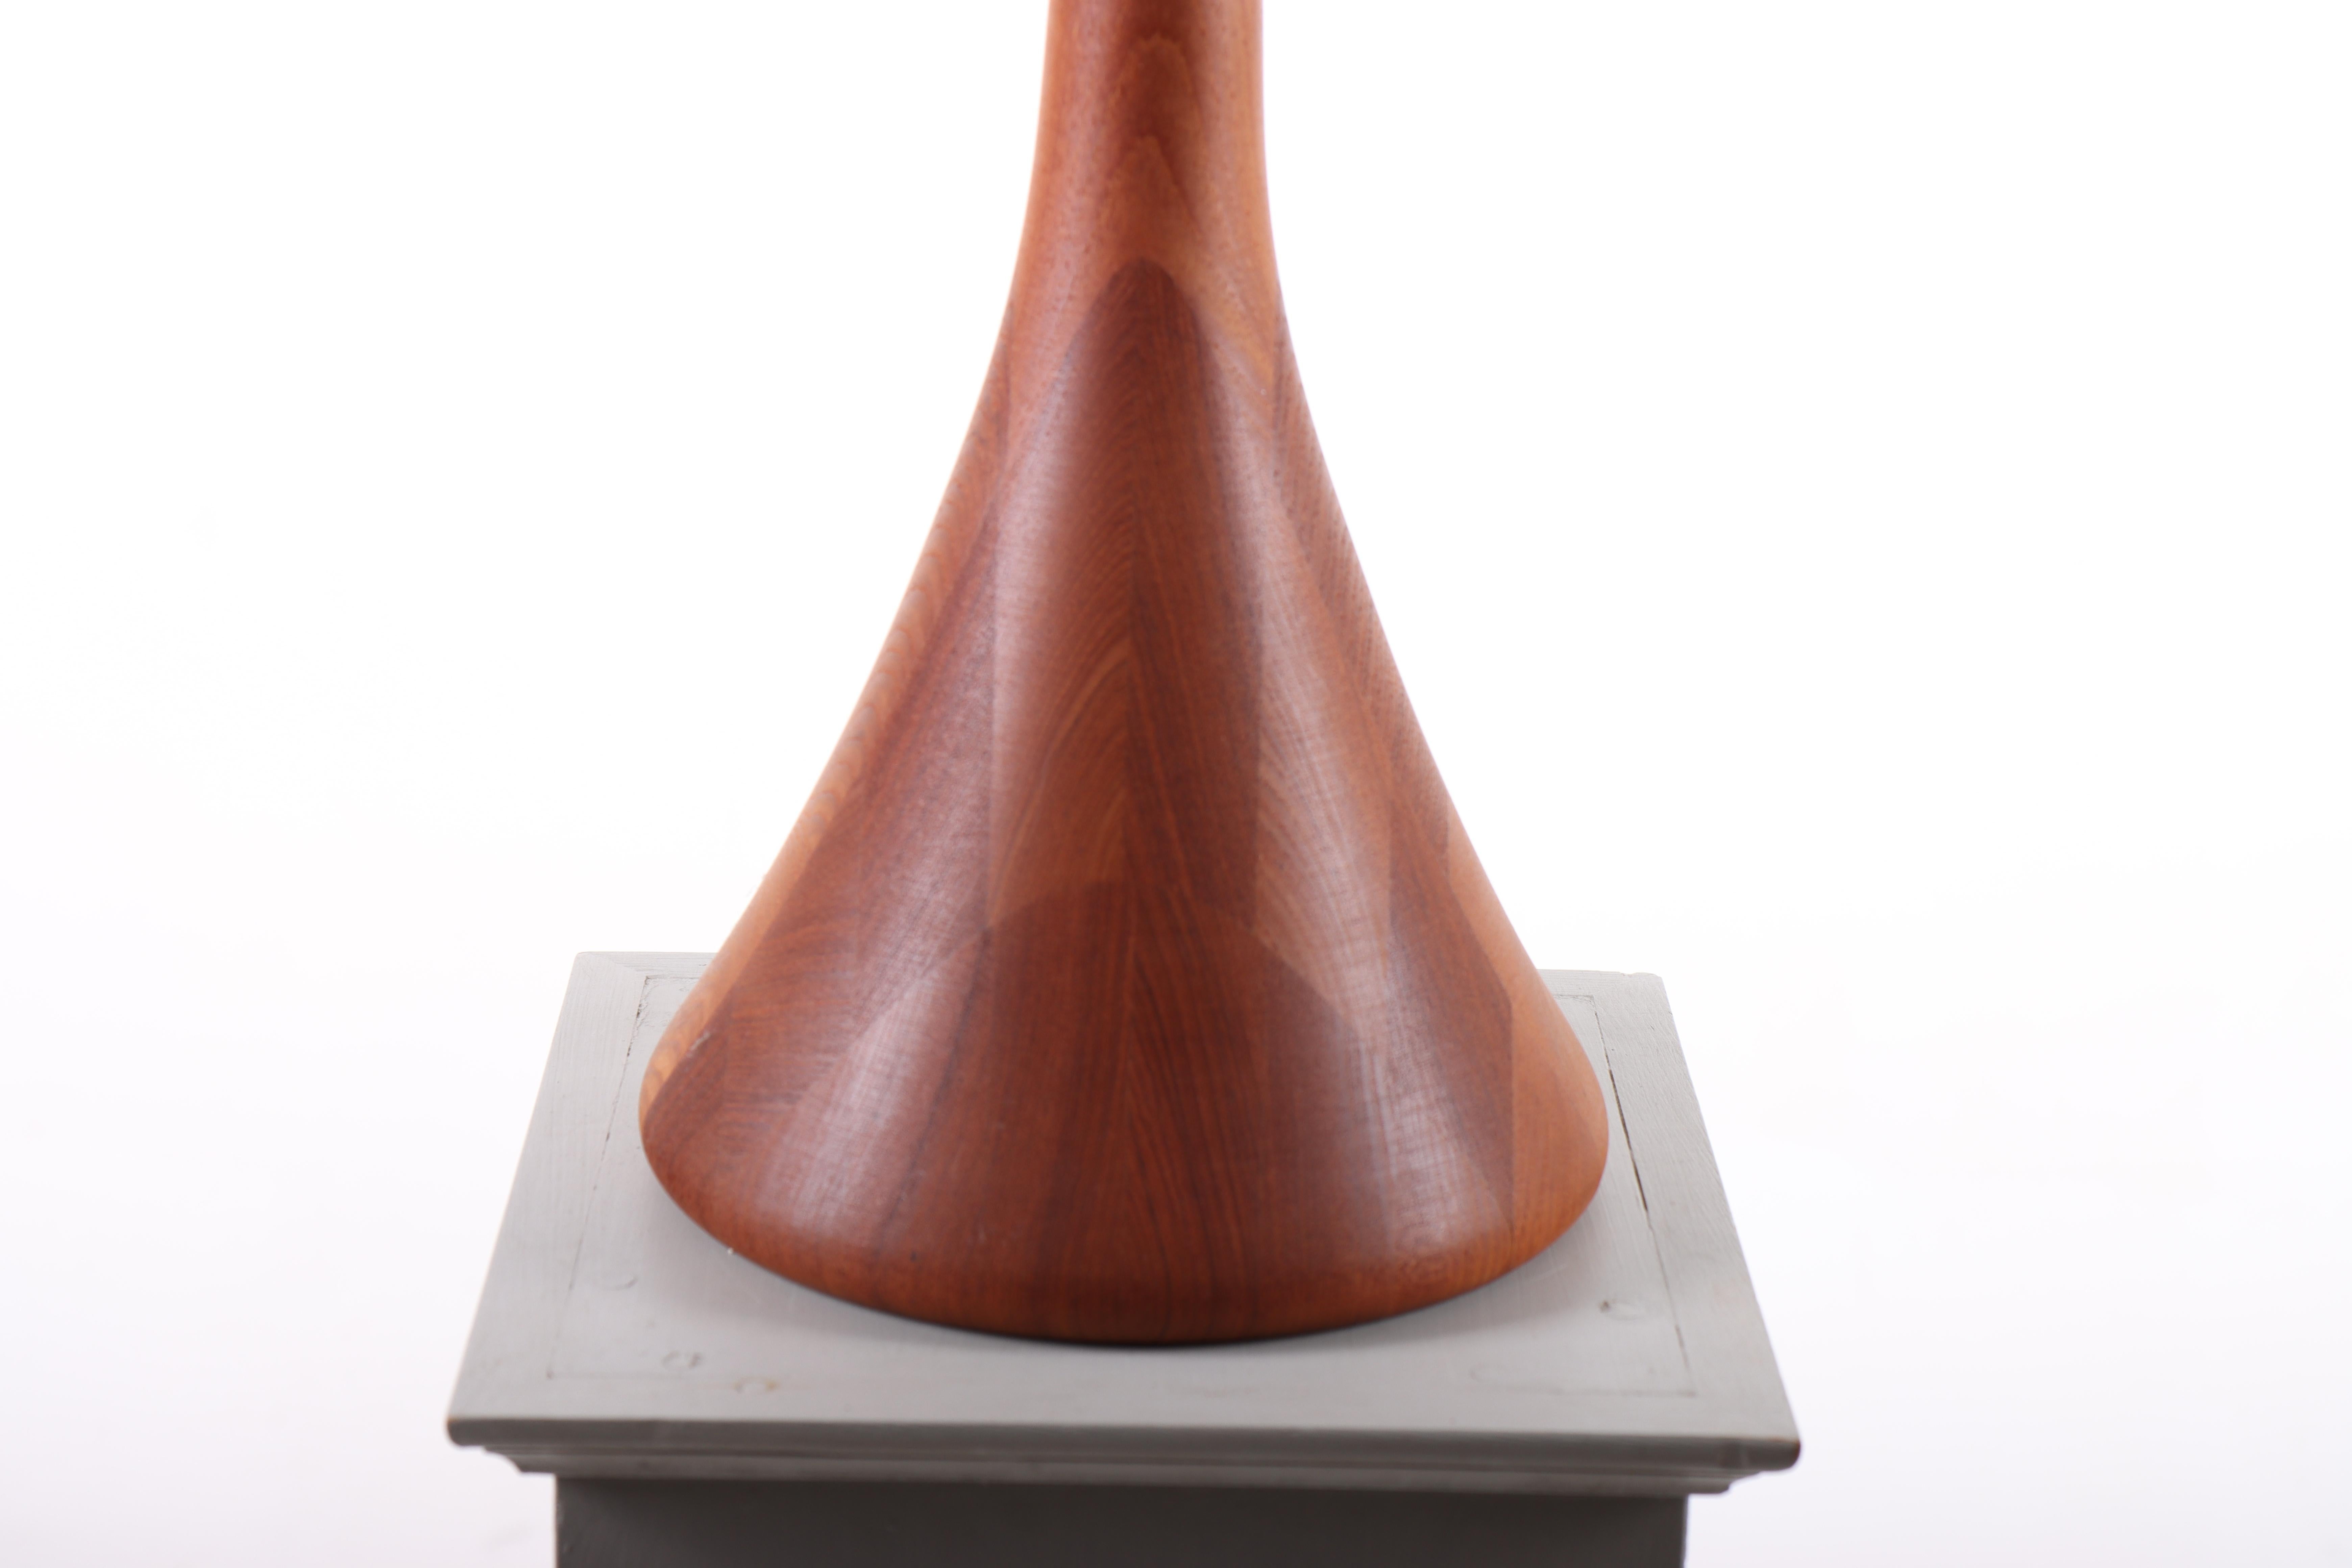 Table lamp in solid teak designed and made by a Scandinavian cabinetmaker in the 1960s
The lamp has a very nice warm patina. Great original condition.